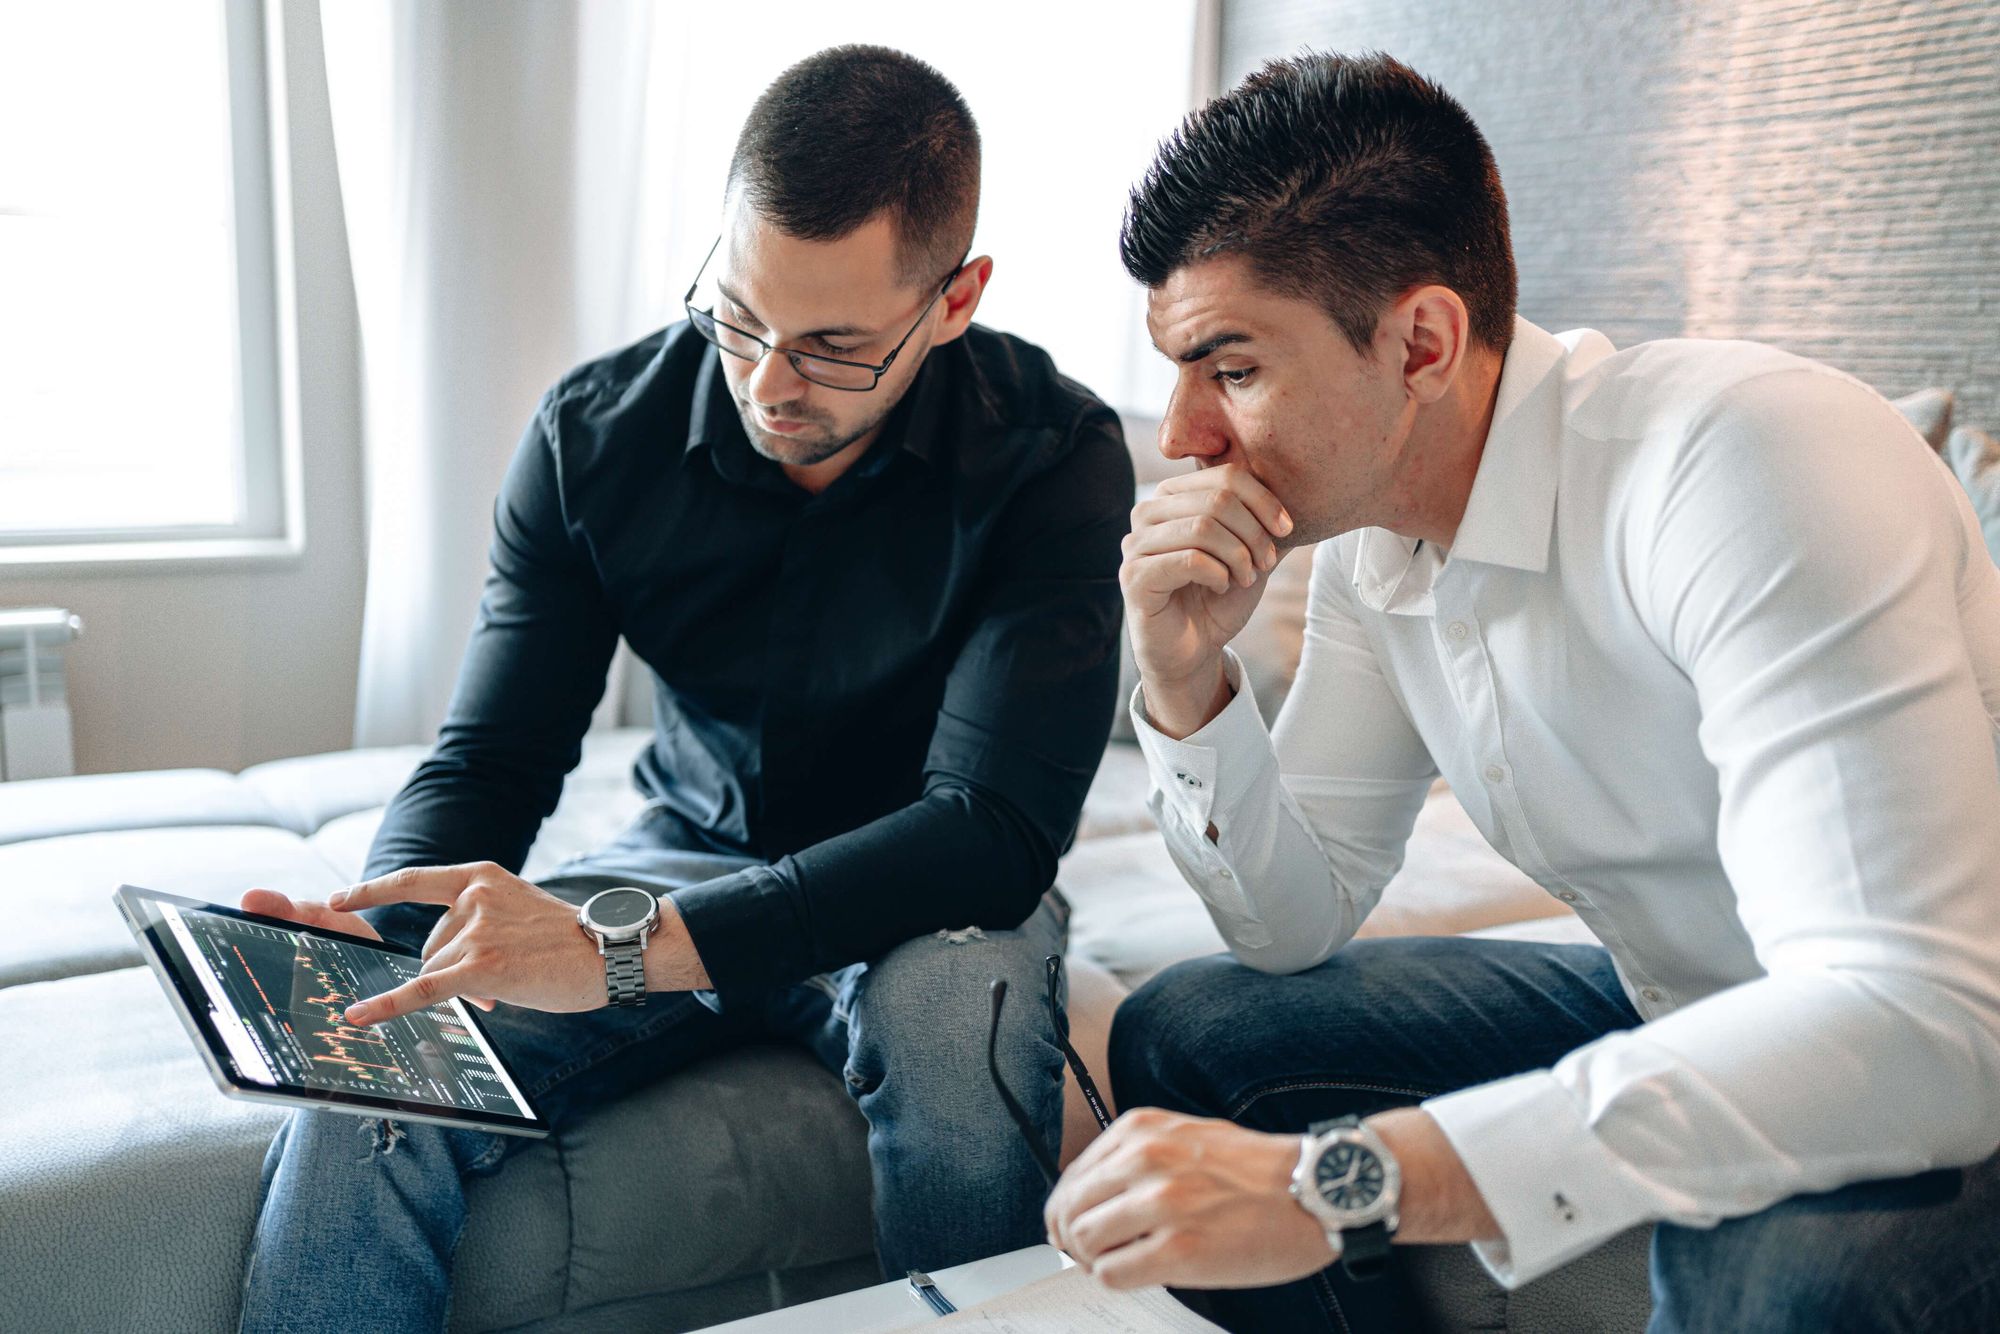 sales performance review image of two men looking at a tablet